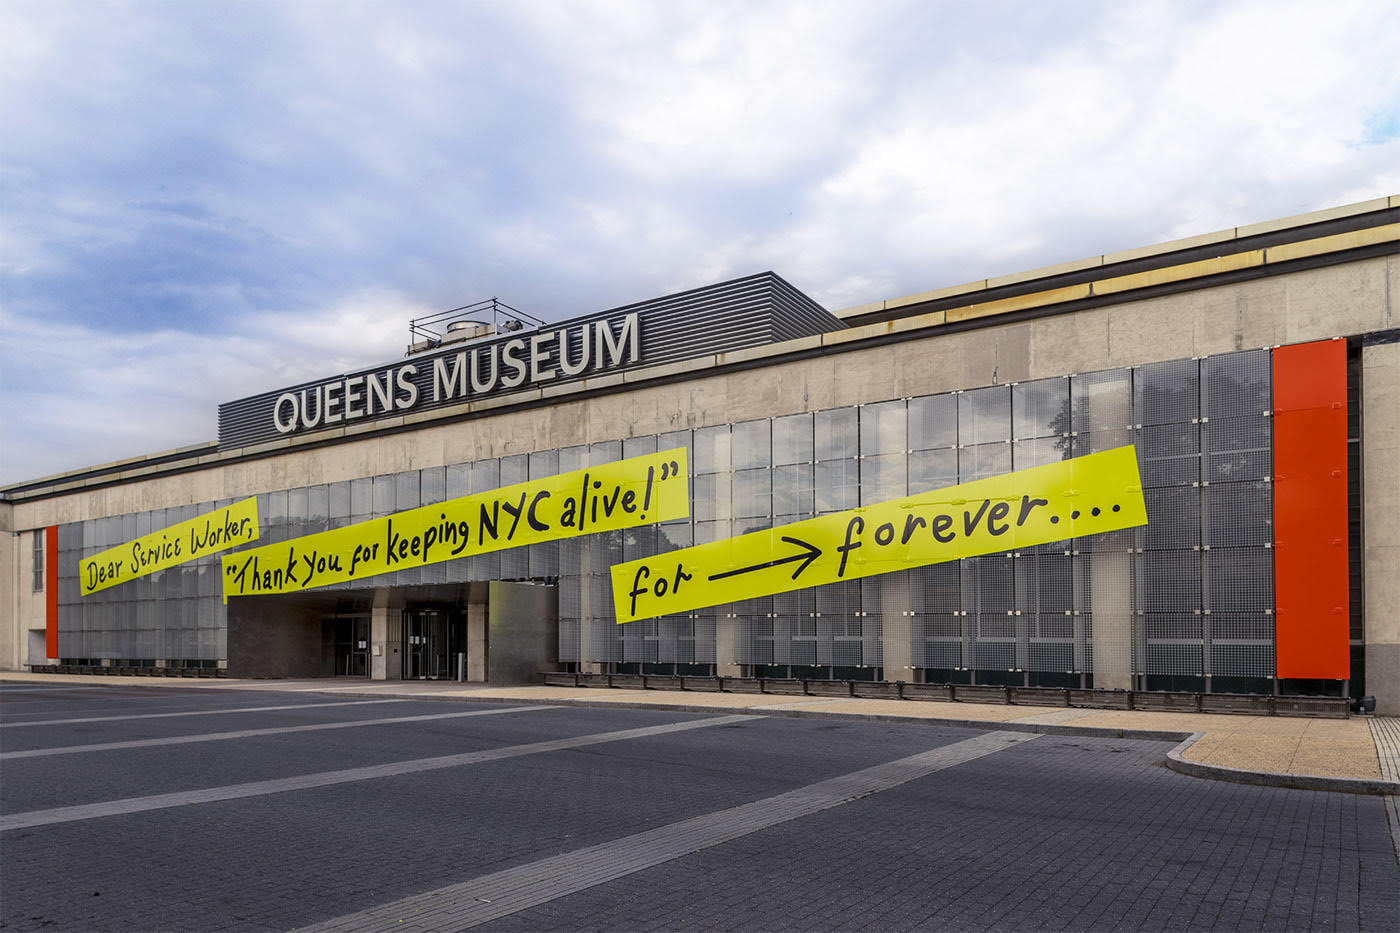 On the Facade of the Museum is a three part banner in yellow with the phrase written in black ink, Dear Service Worker, Thank you for keeping NYC alive! For forever… There is a forward arrow between the words for and forever. The top of the building says Queens Museum. All of this is set below clouds and blue skies.